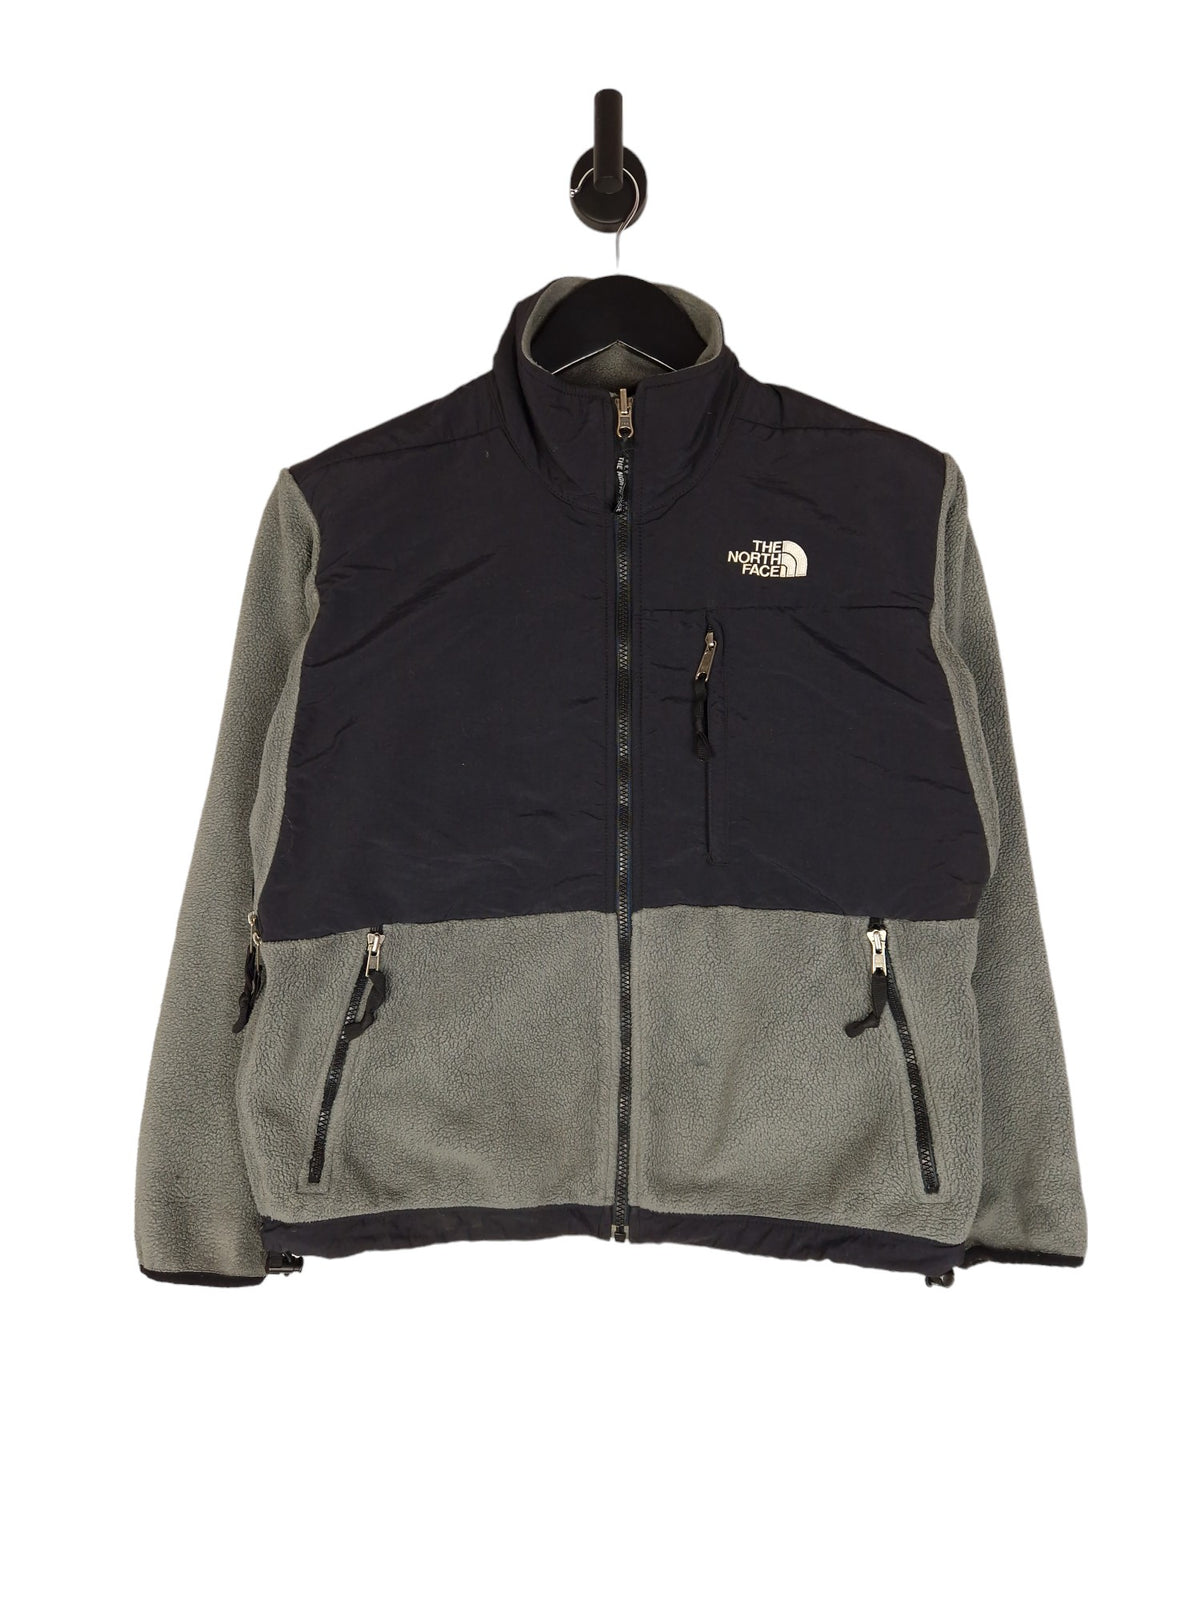 The North Face Denali Fleece- Size S/P UK 8 to 10